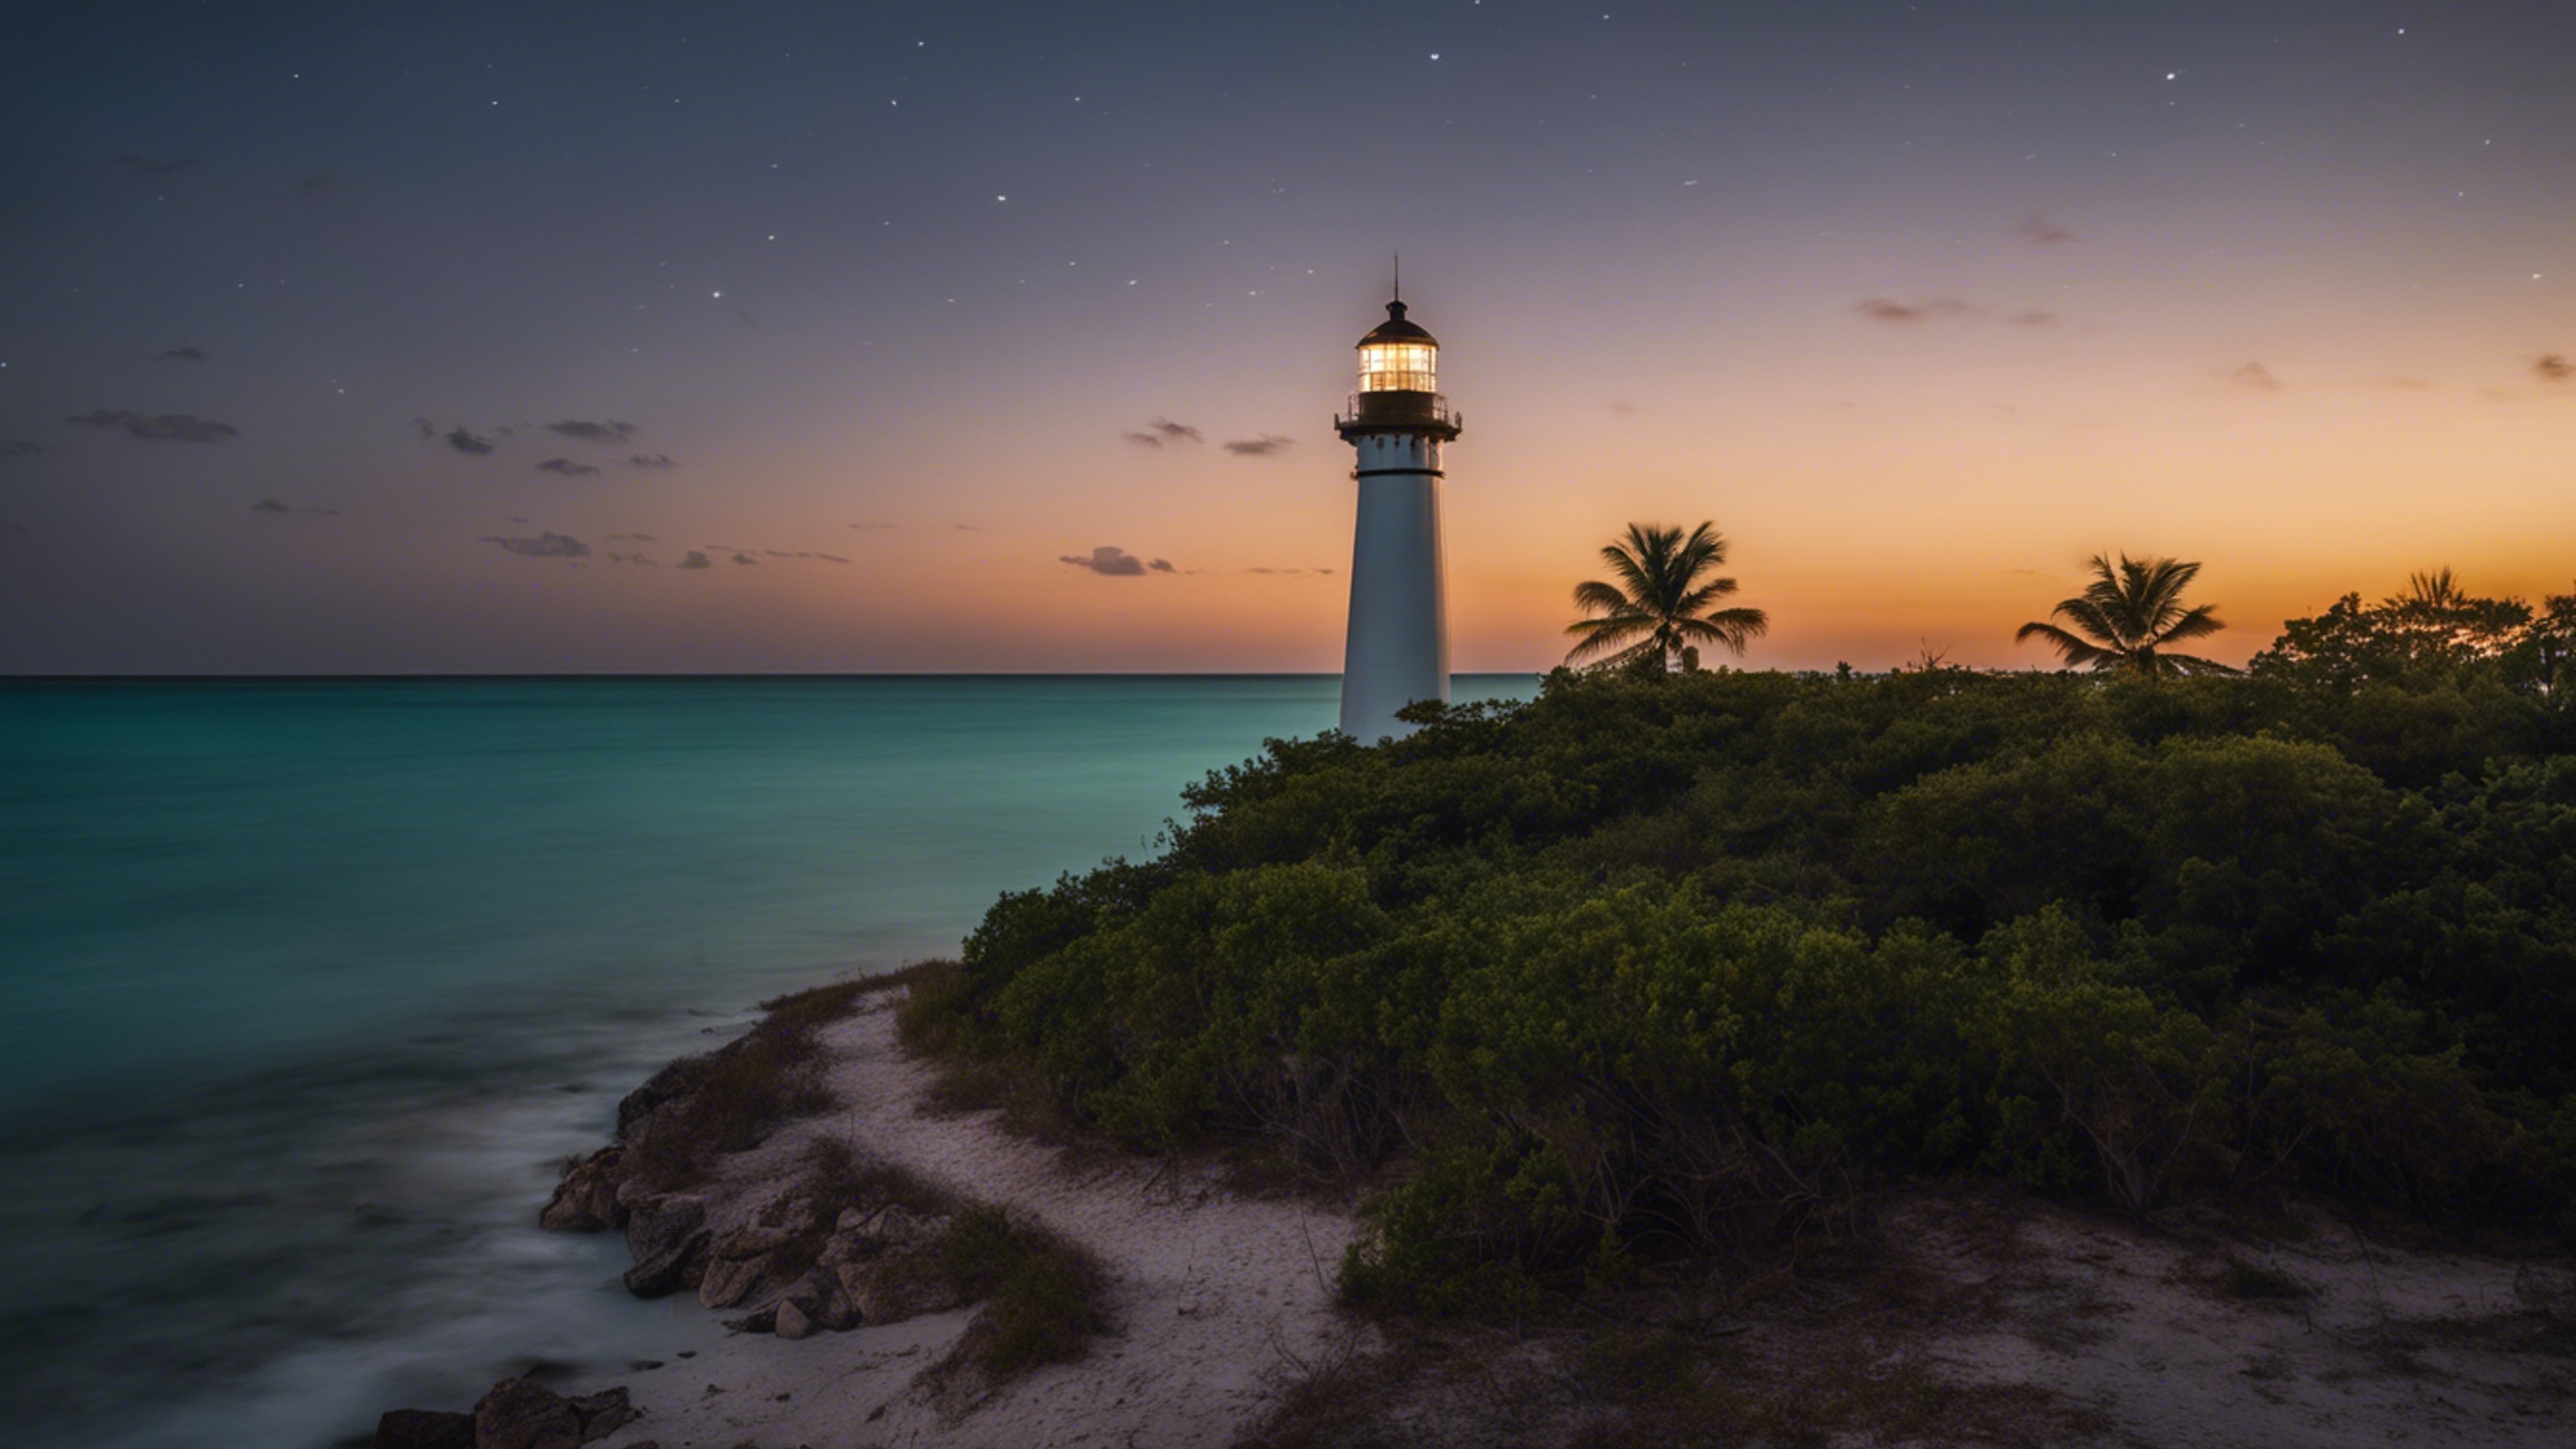 A night shot of an historic lighthouse in Key Biscayne, with the beam of light cutting through the darkness. Kertas dinding[4d5993bb763c4a90b239]